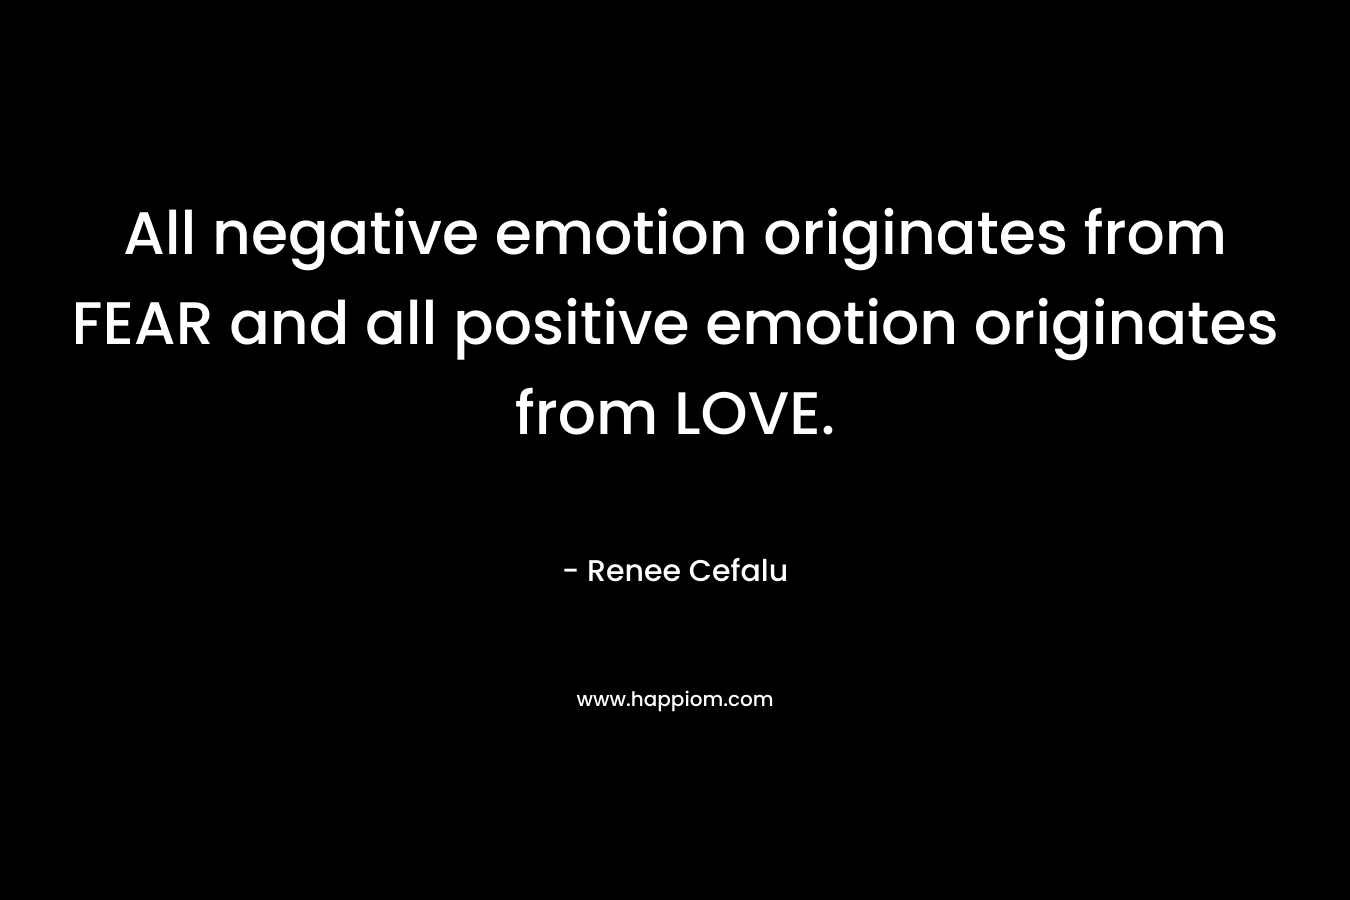 All negative emotion originates from FEAR and all positive emotion originates from LOVE. – Renee Cefalu